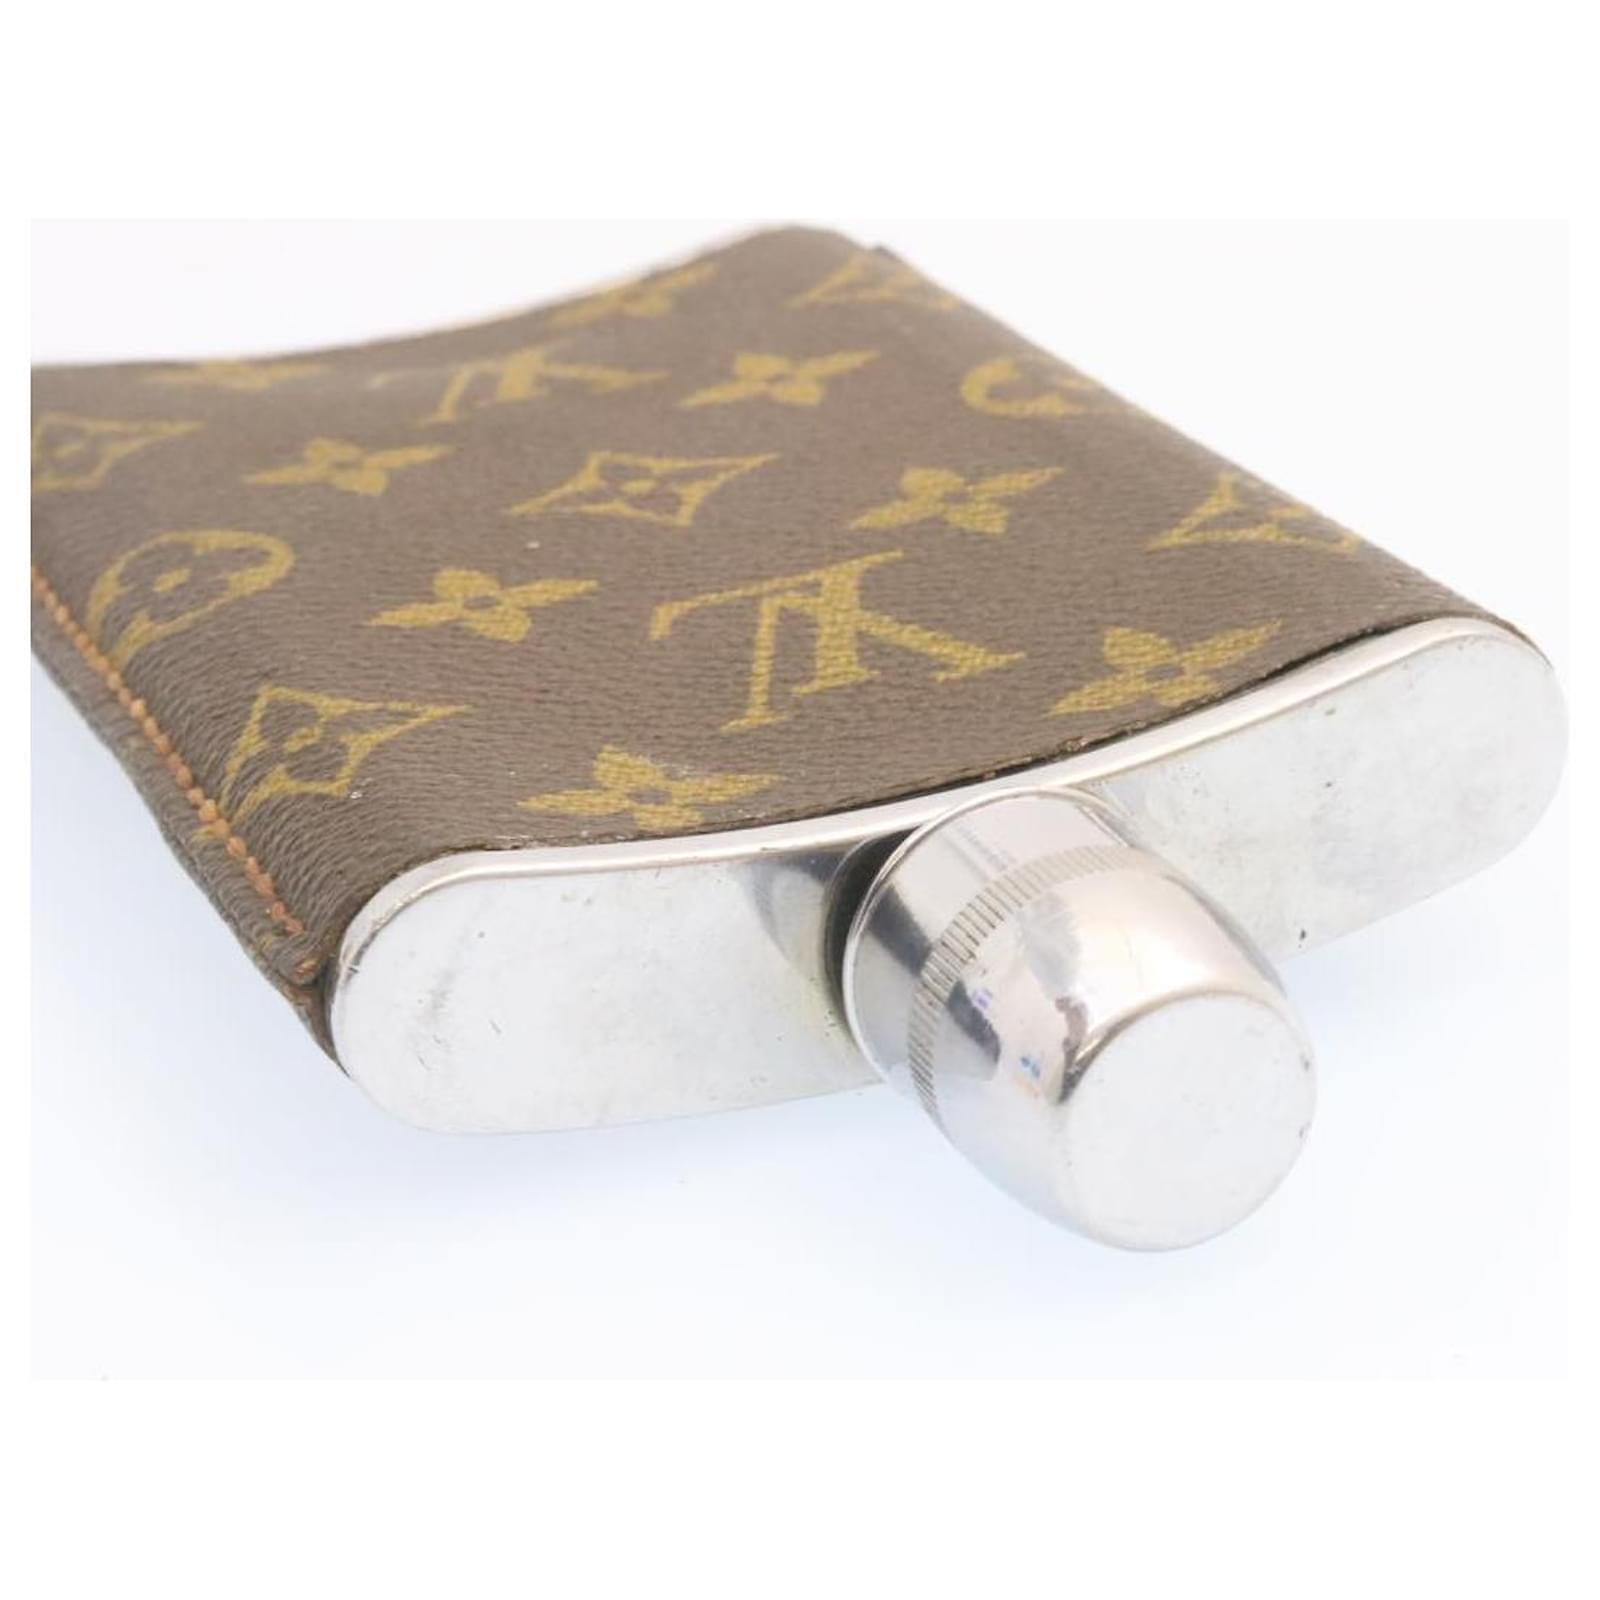 LOUIS VUITTON Keepall Motif Paper Weight Metal Gold Tone LV Auth